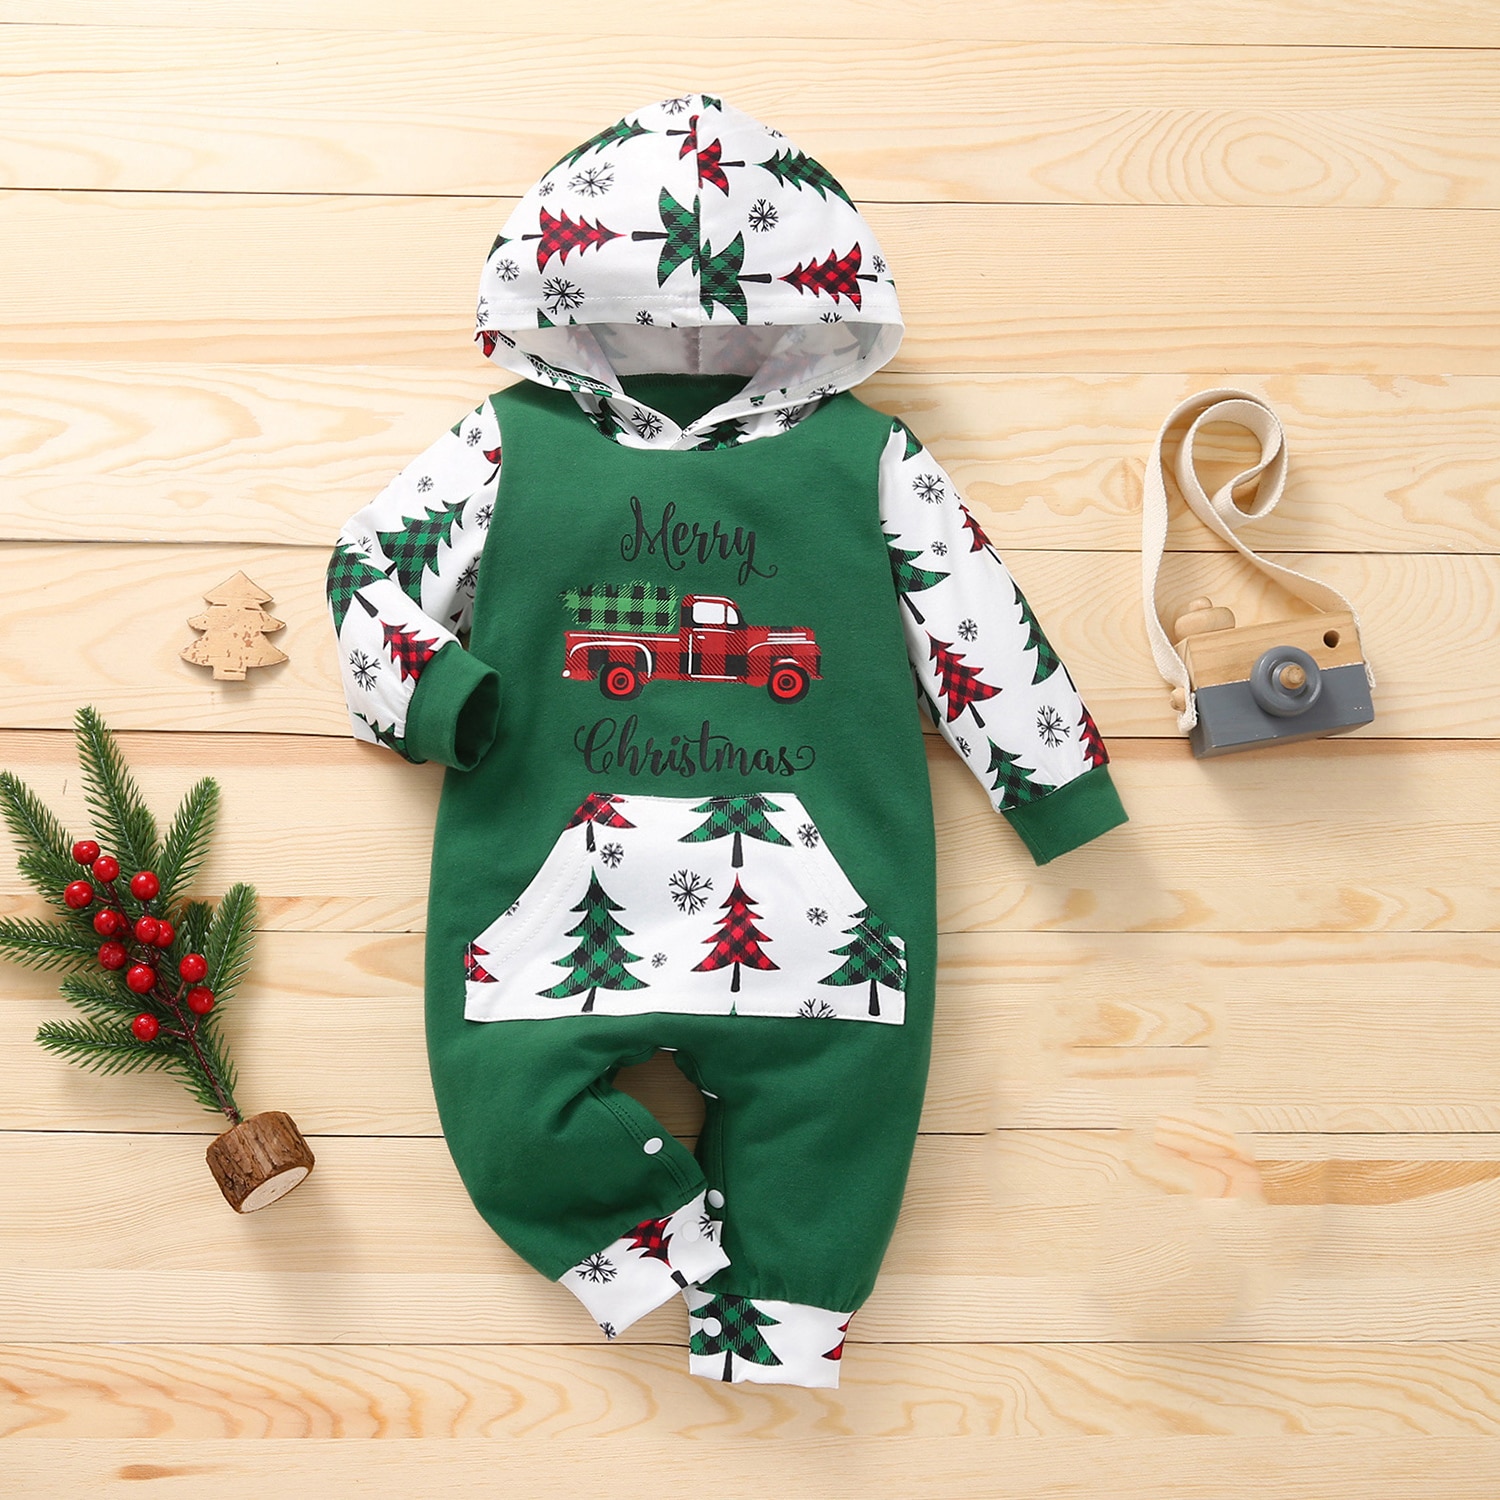 Newborn Baby Christmas Hooded Jumpsuit Boys Girls Bodysuits Outfits Costume Babany bebe Infant Xmas Playsuit Hoodies 2 1 - Christmas Onesie Merch